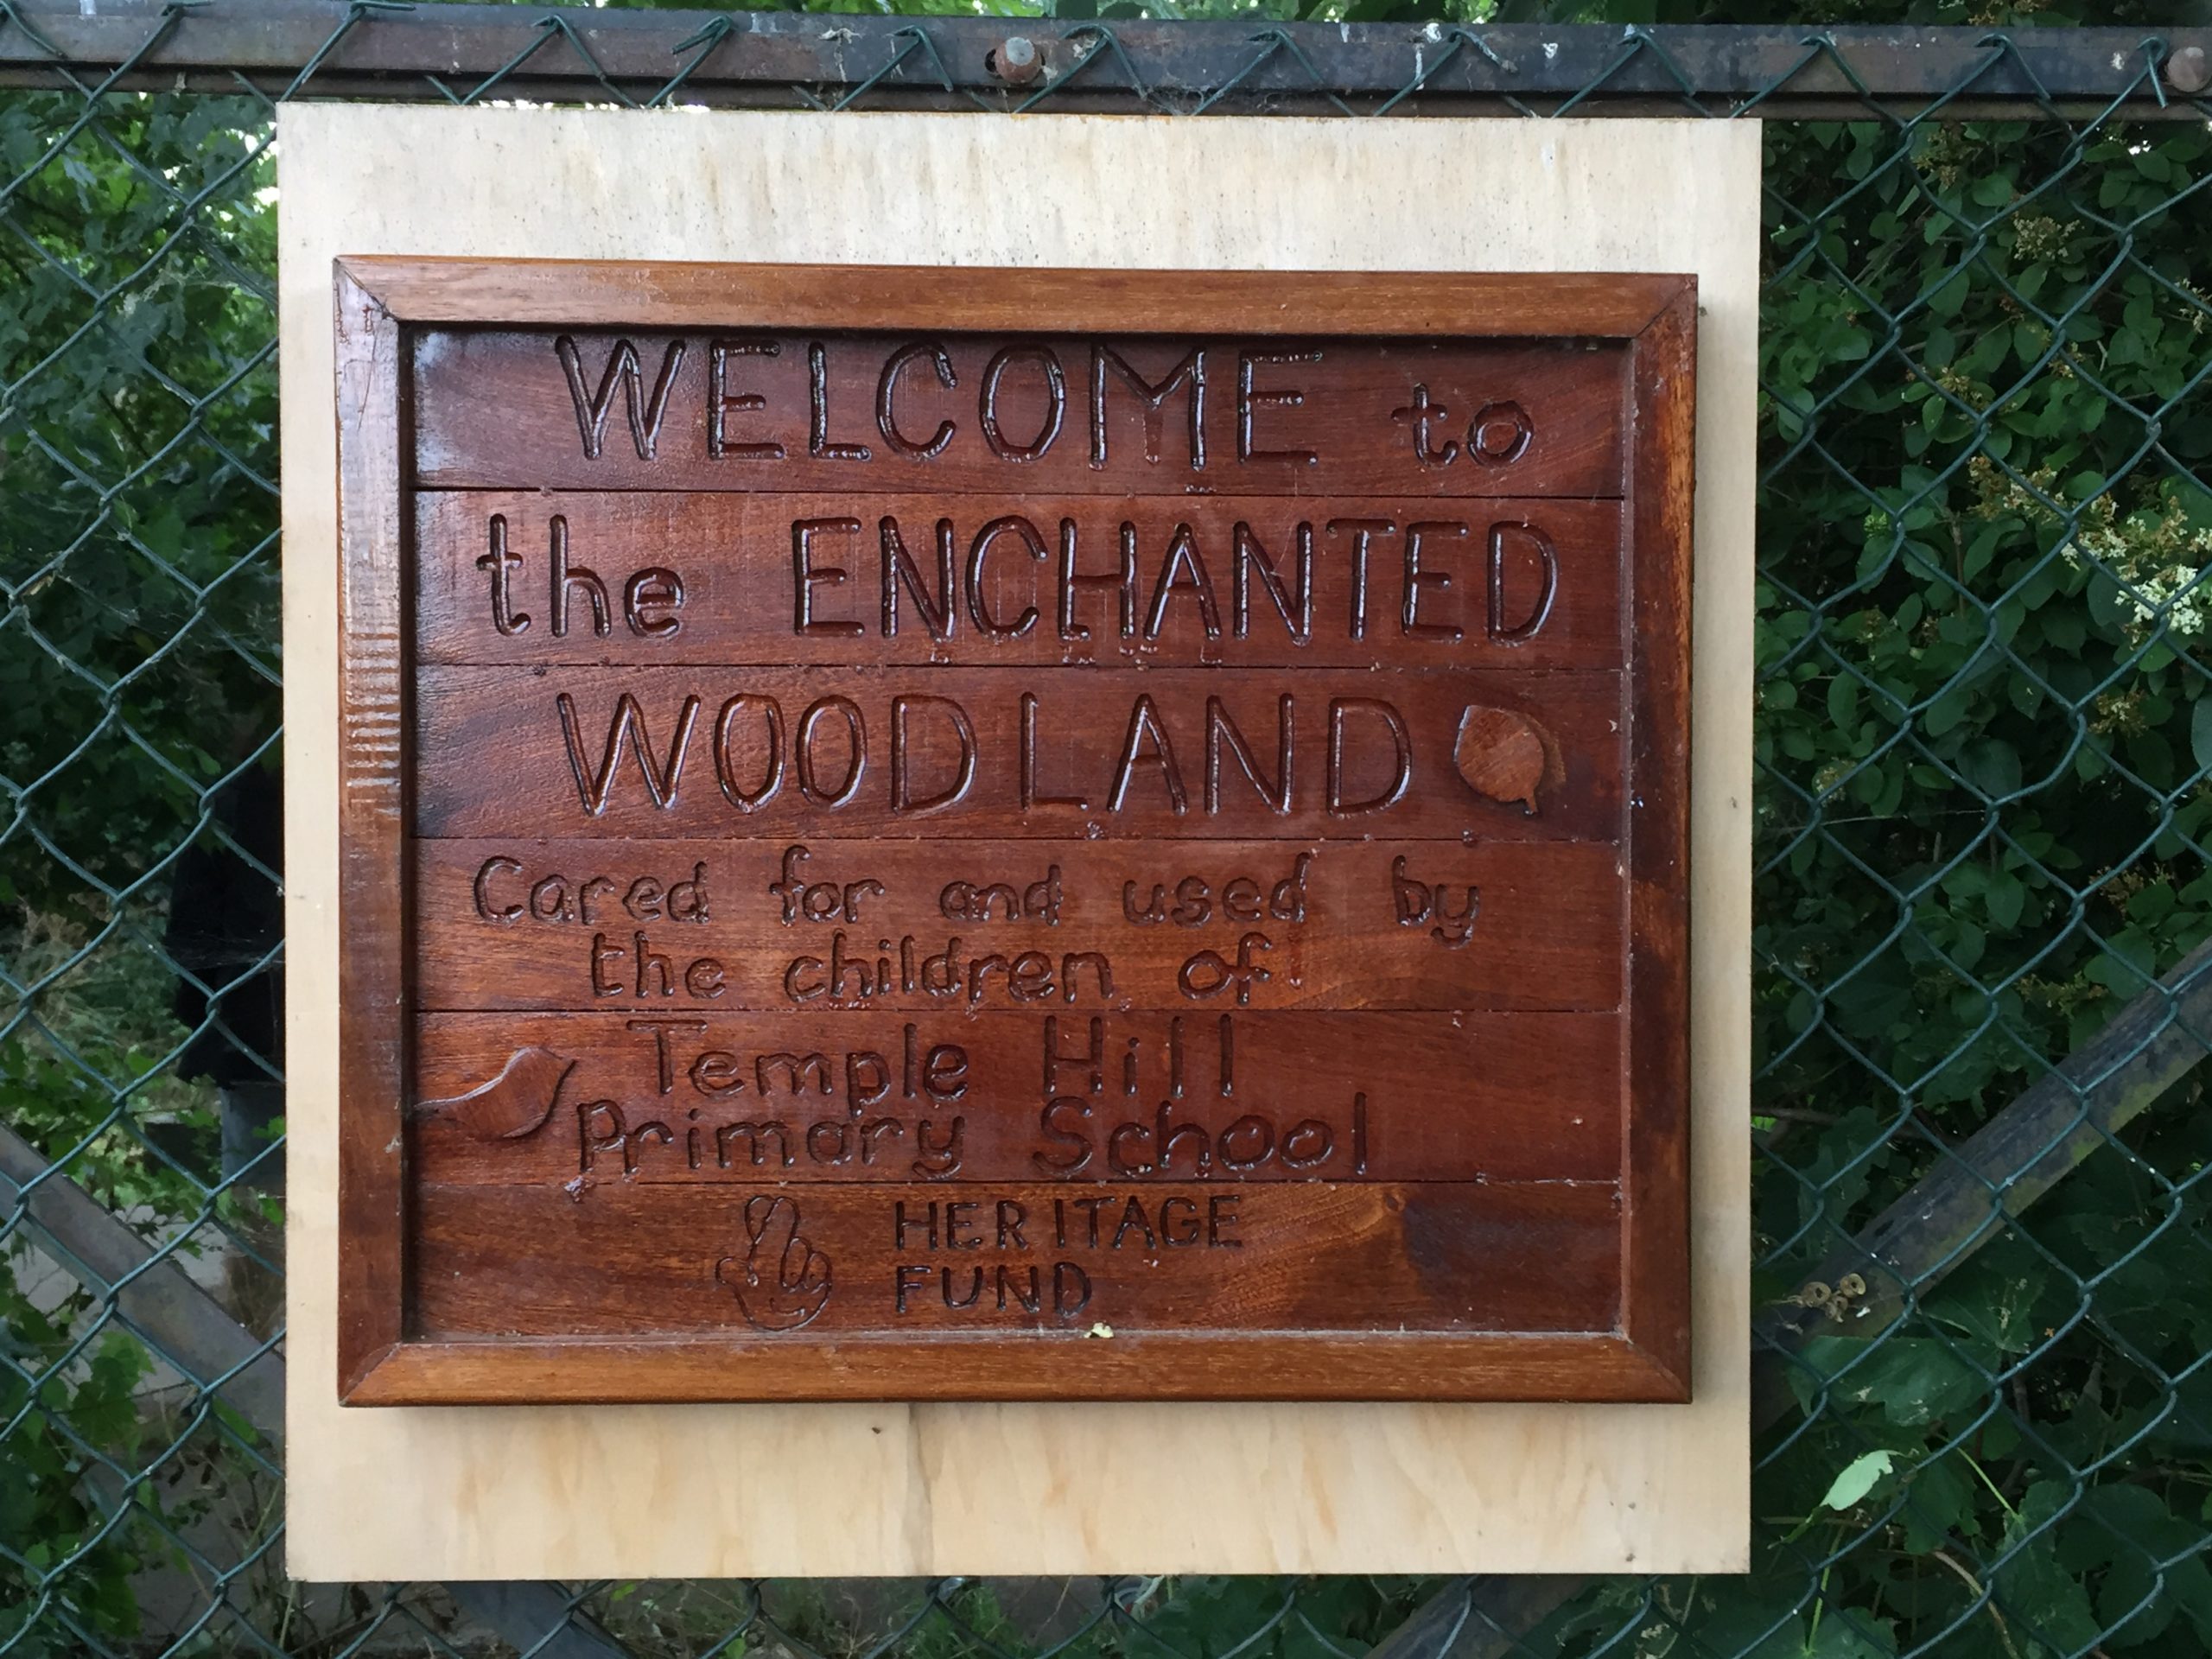 Small wooden sign saying welcome to the Enchanted Woodland